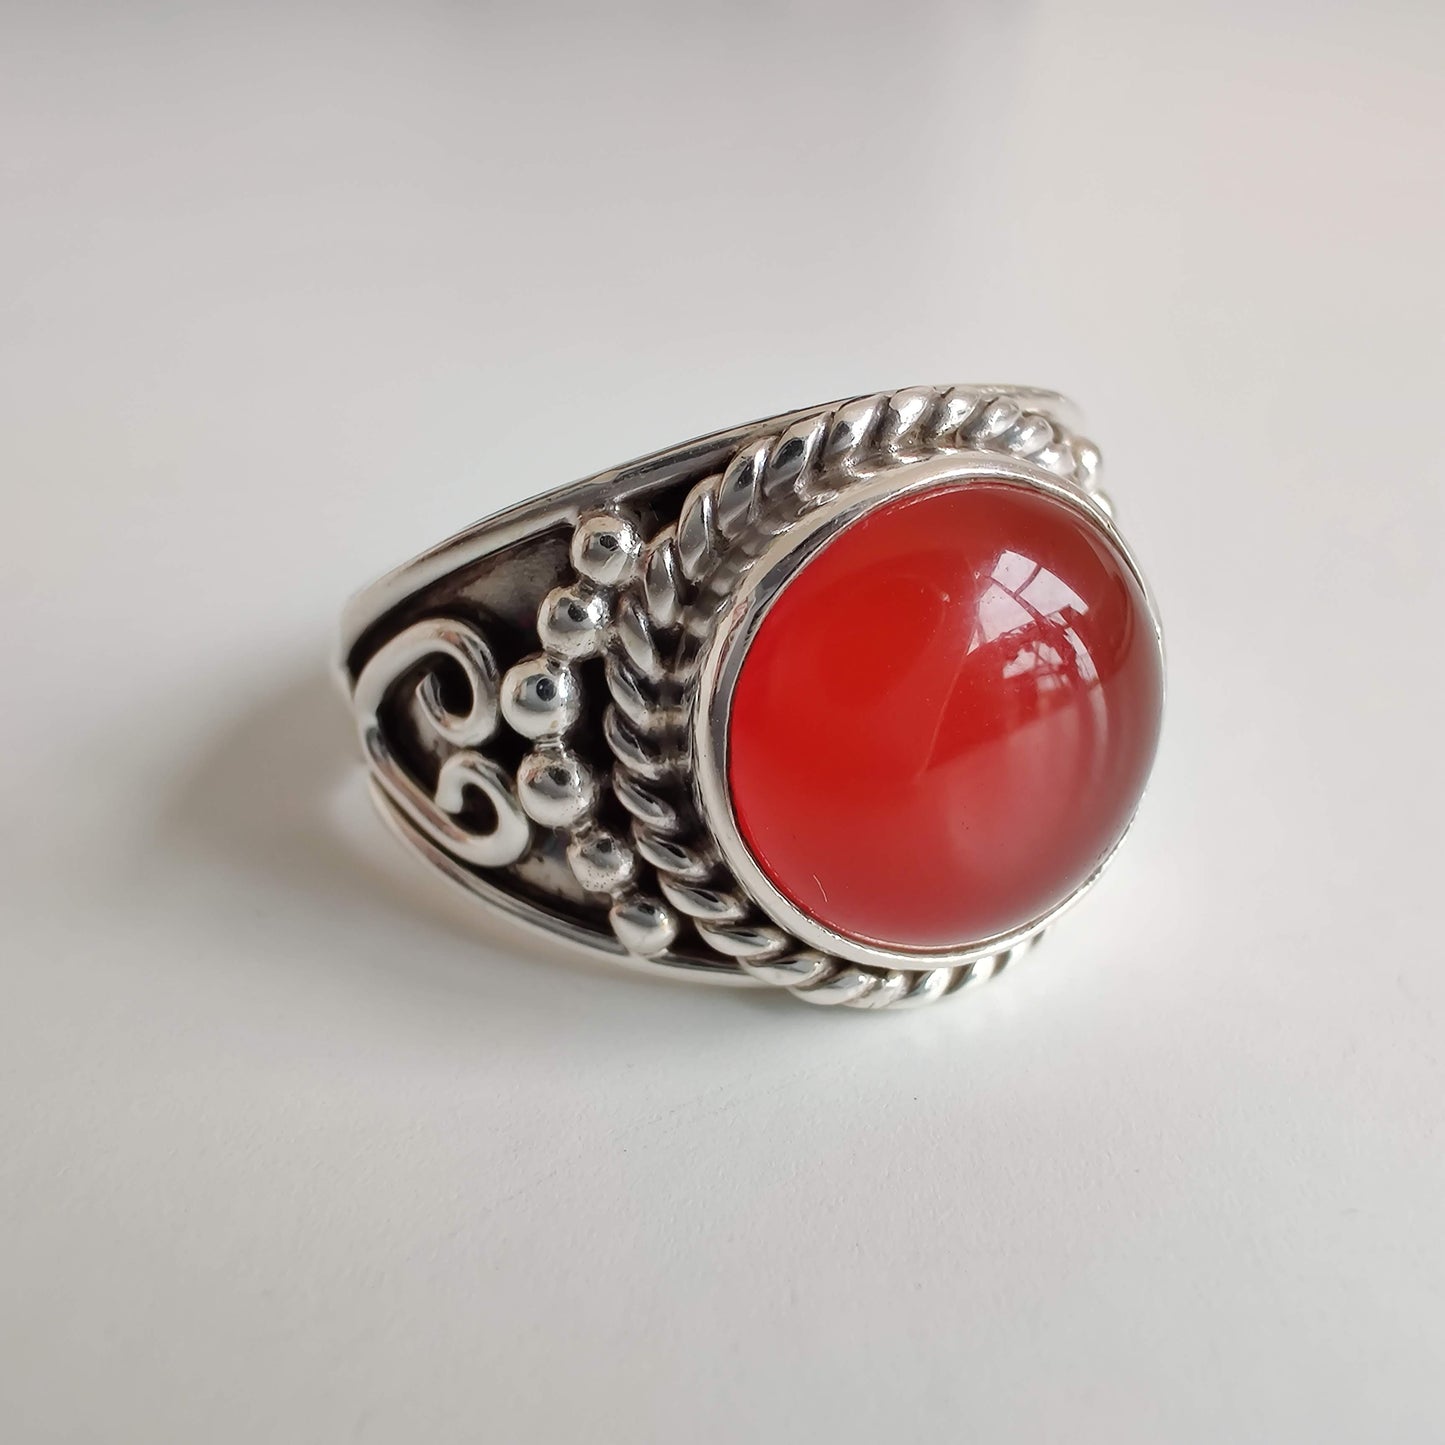 Carnelian Round Signet 925 Sterling Silver Ring - Rivendell Shop